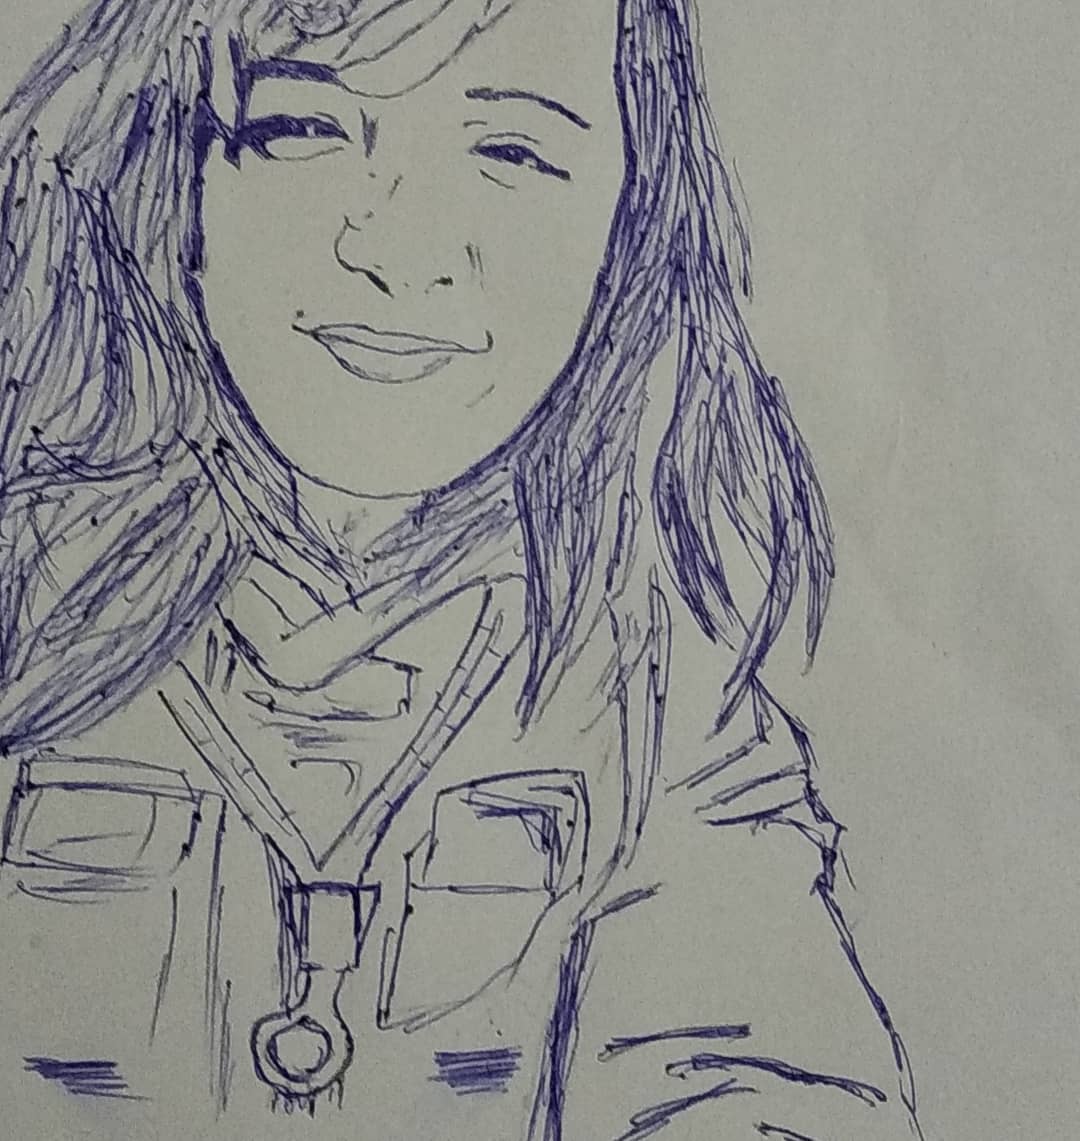 This blue pen art is made by @7_vaibhav_7_Hope you like it  @ShirleySetia Also plss plss check this thread for some amazing arts... https://www.instagram.com/p/CBGRYVWFdKi/?igshid=1r90o293nc9gh